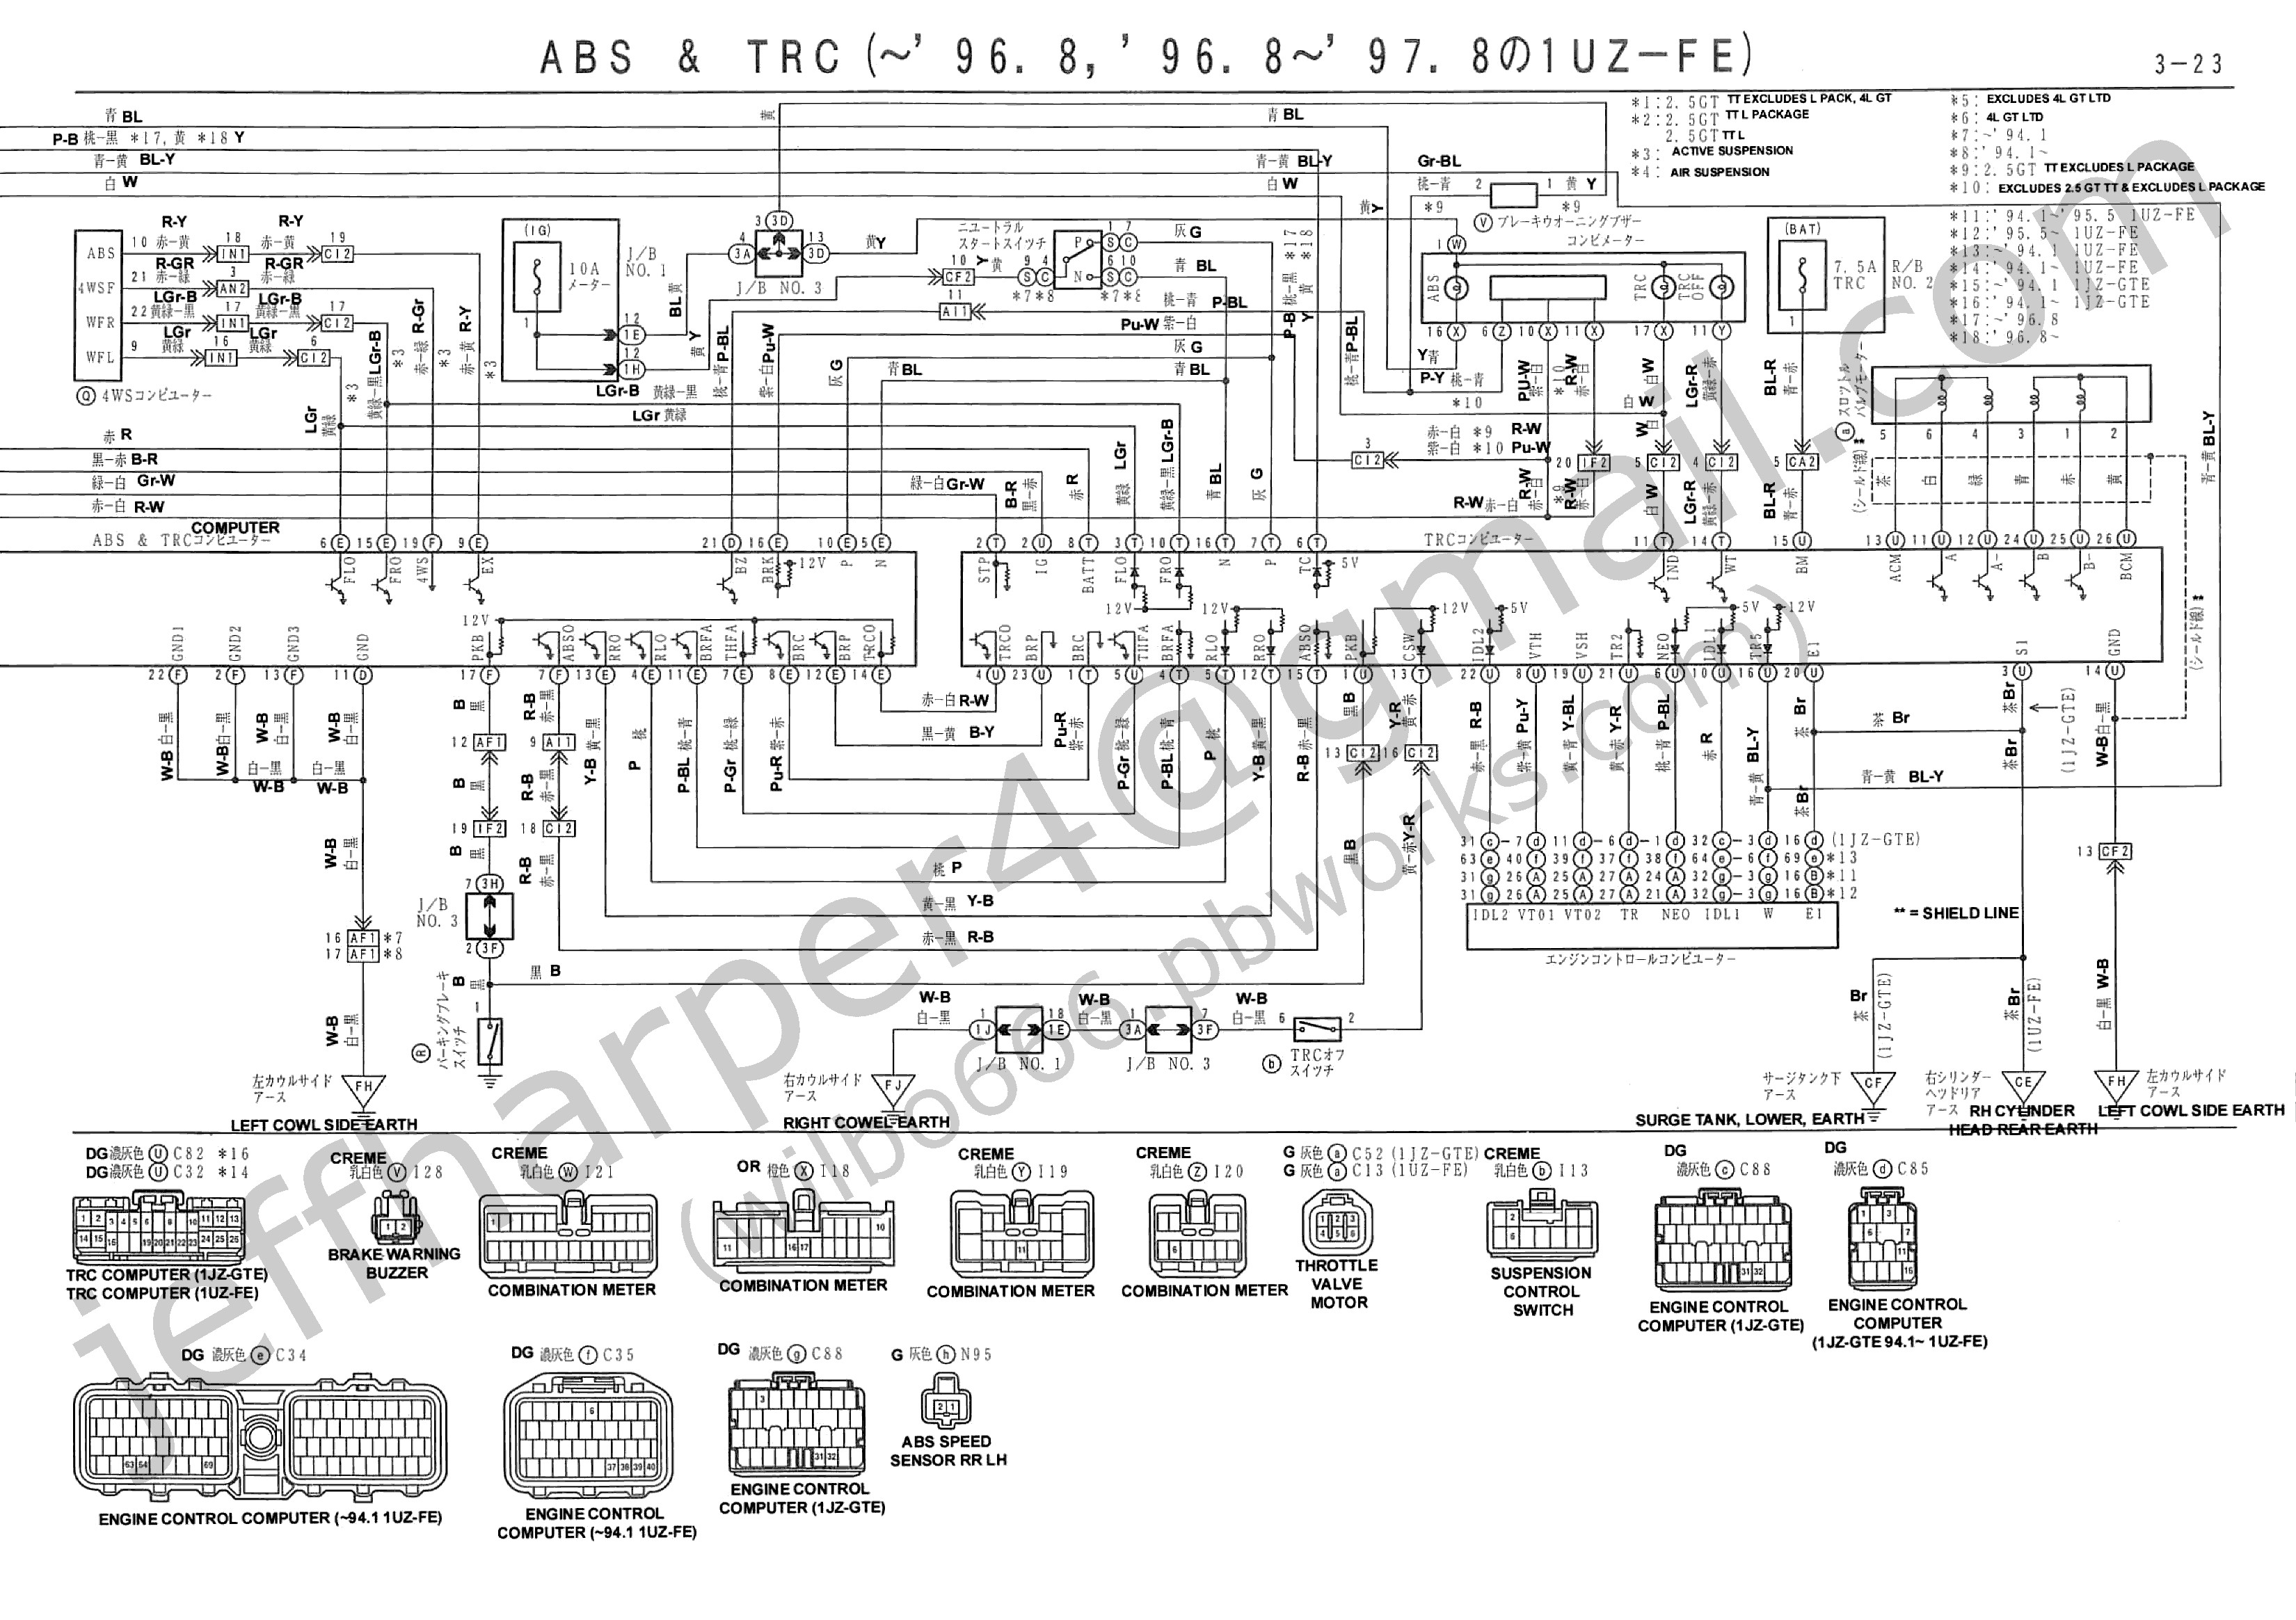 Car Engine Diagrams Free Schematic Symbols Threads Free Image About Wiring Diagram and Of Car Engine Diagrams Free